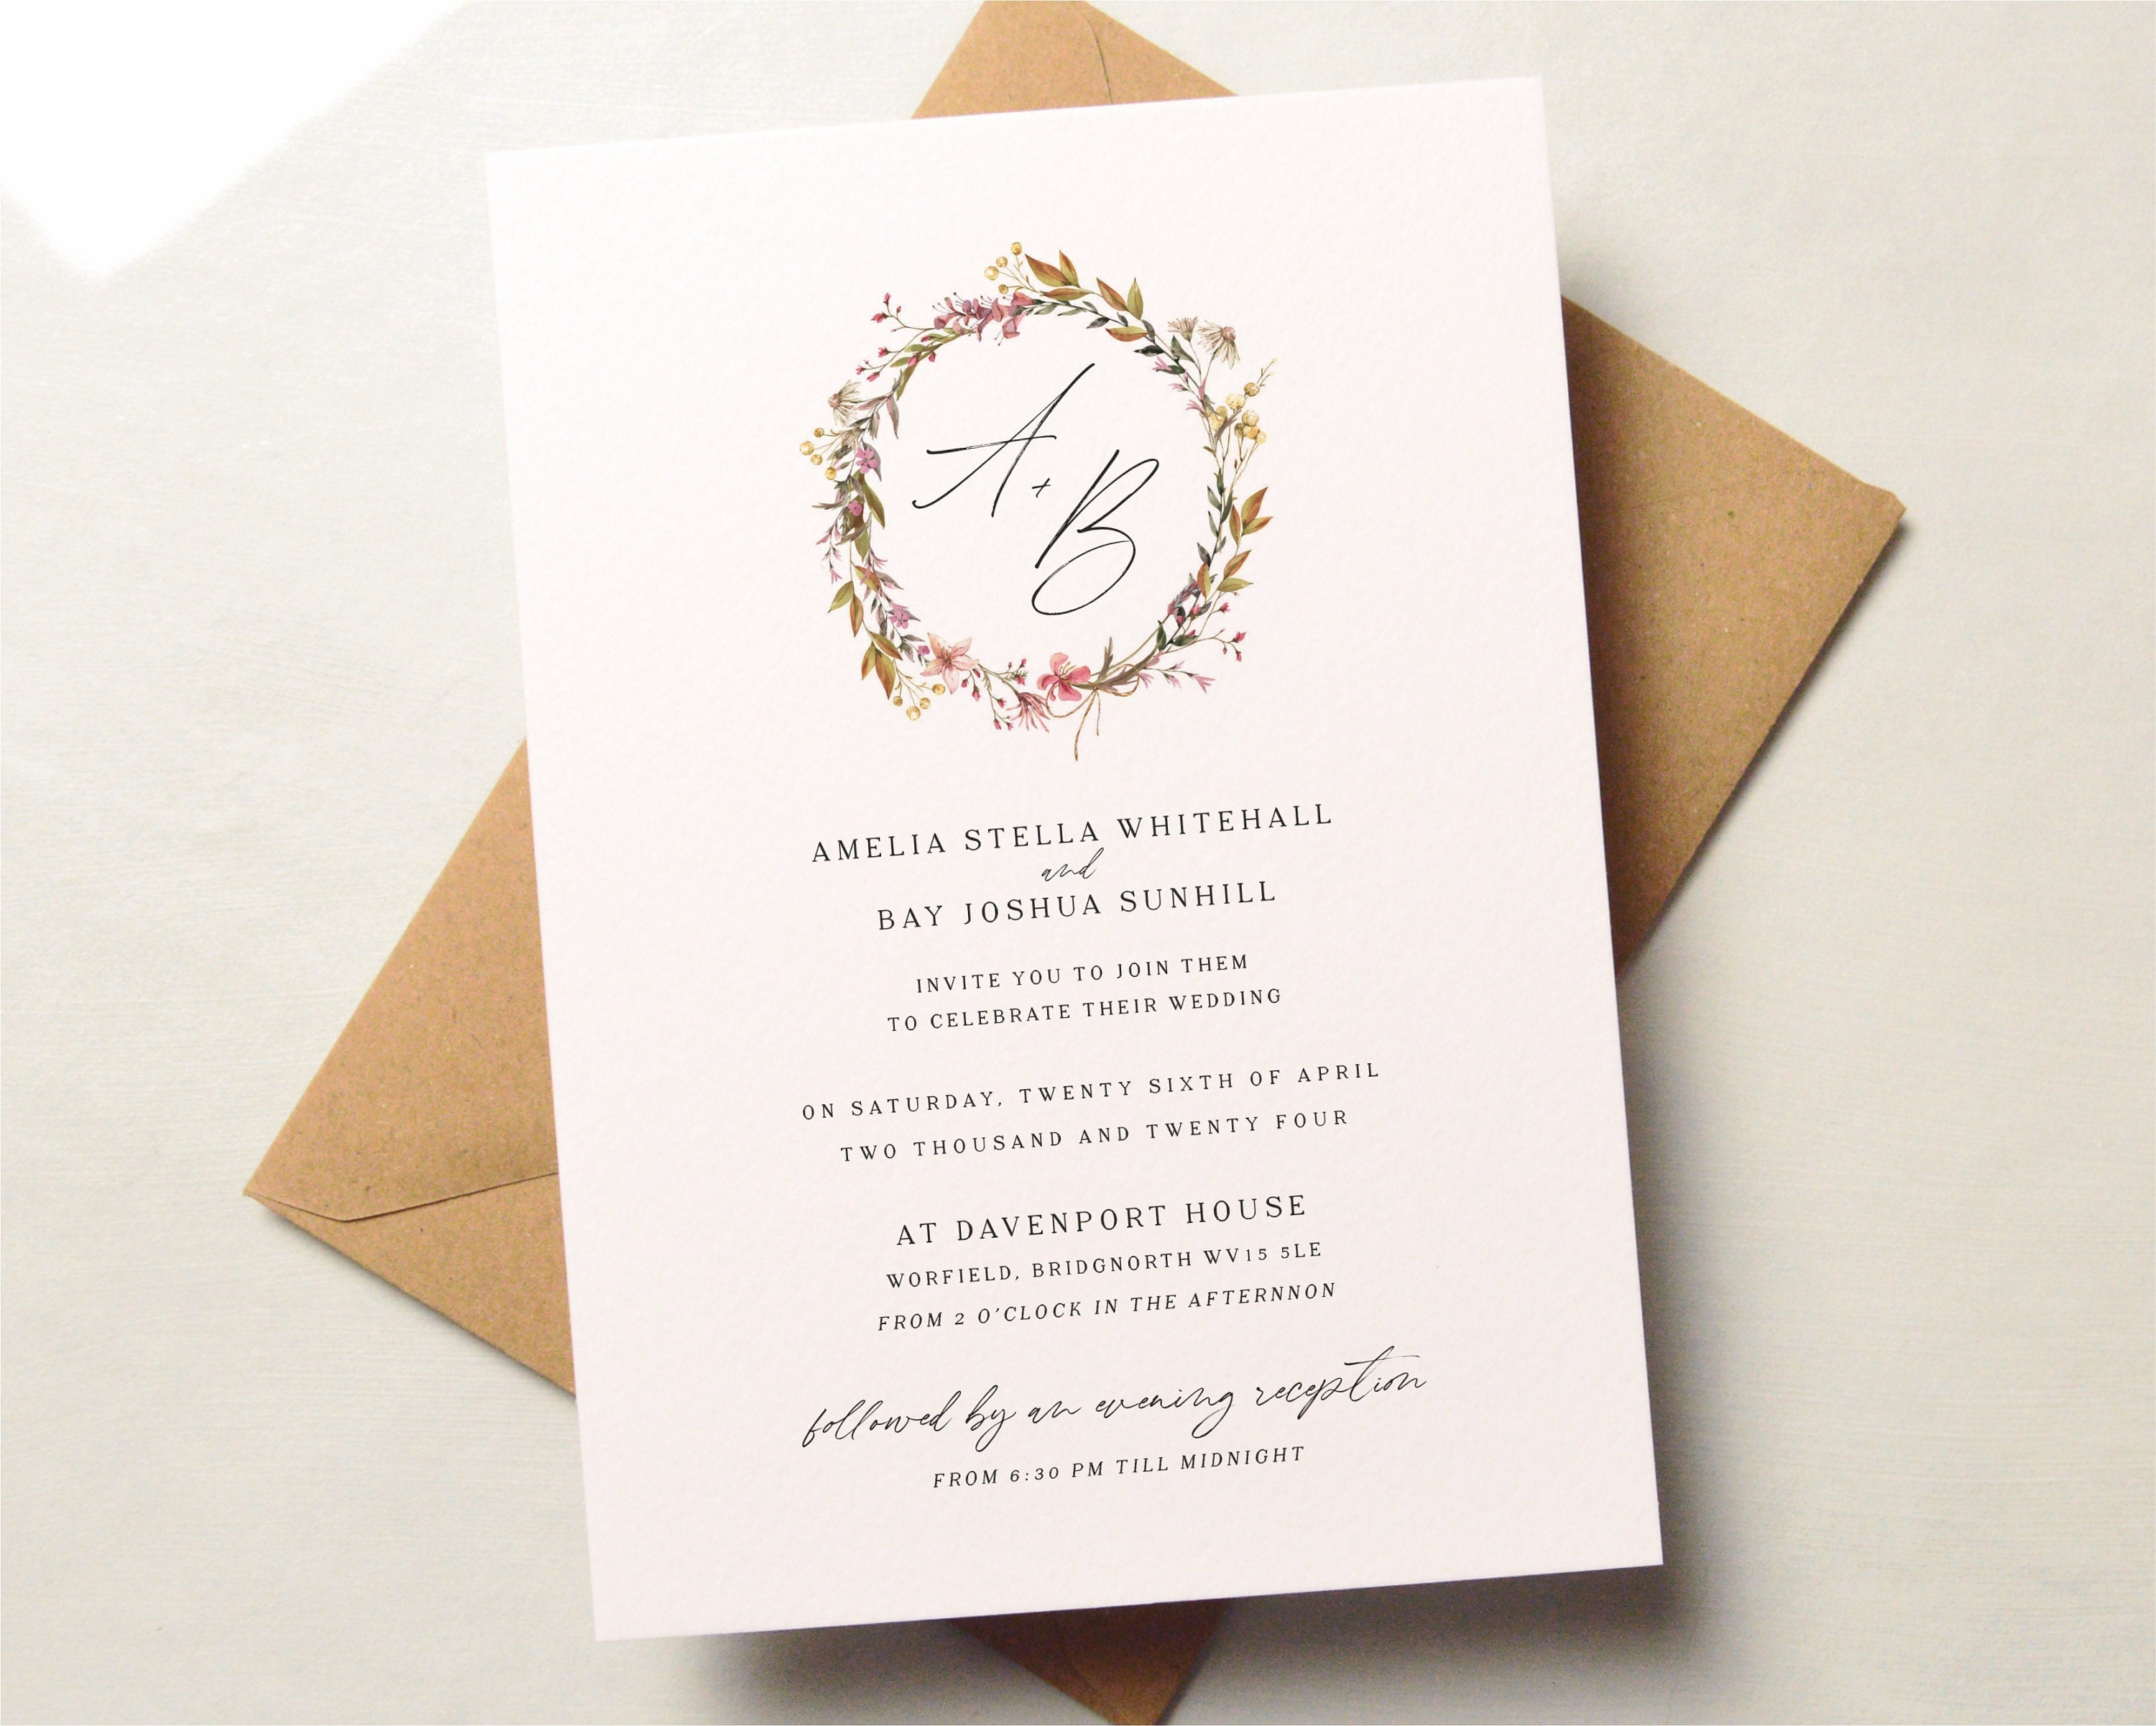 Invitation Cards - 50 Fill-In Floral Classy Cards with Envelopes